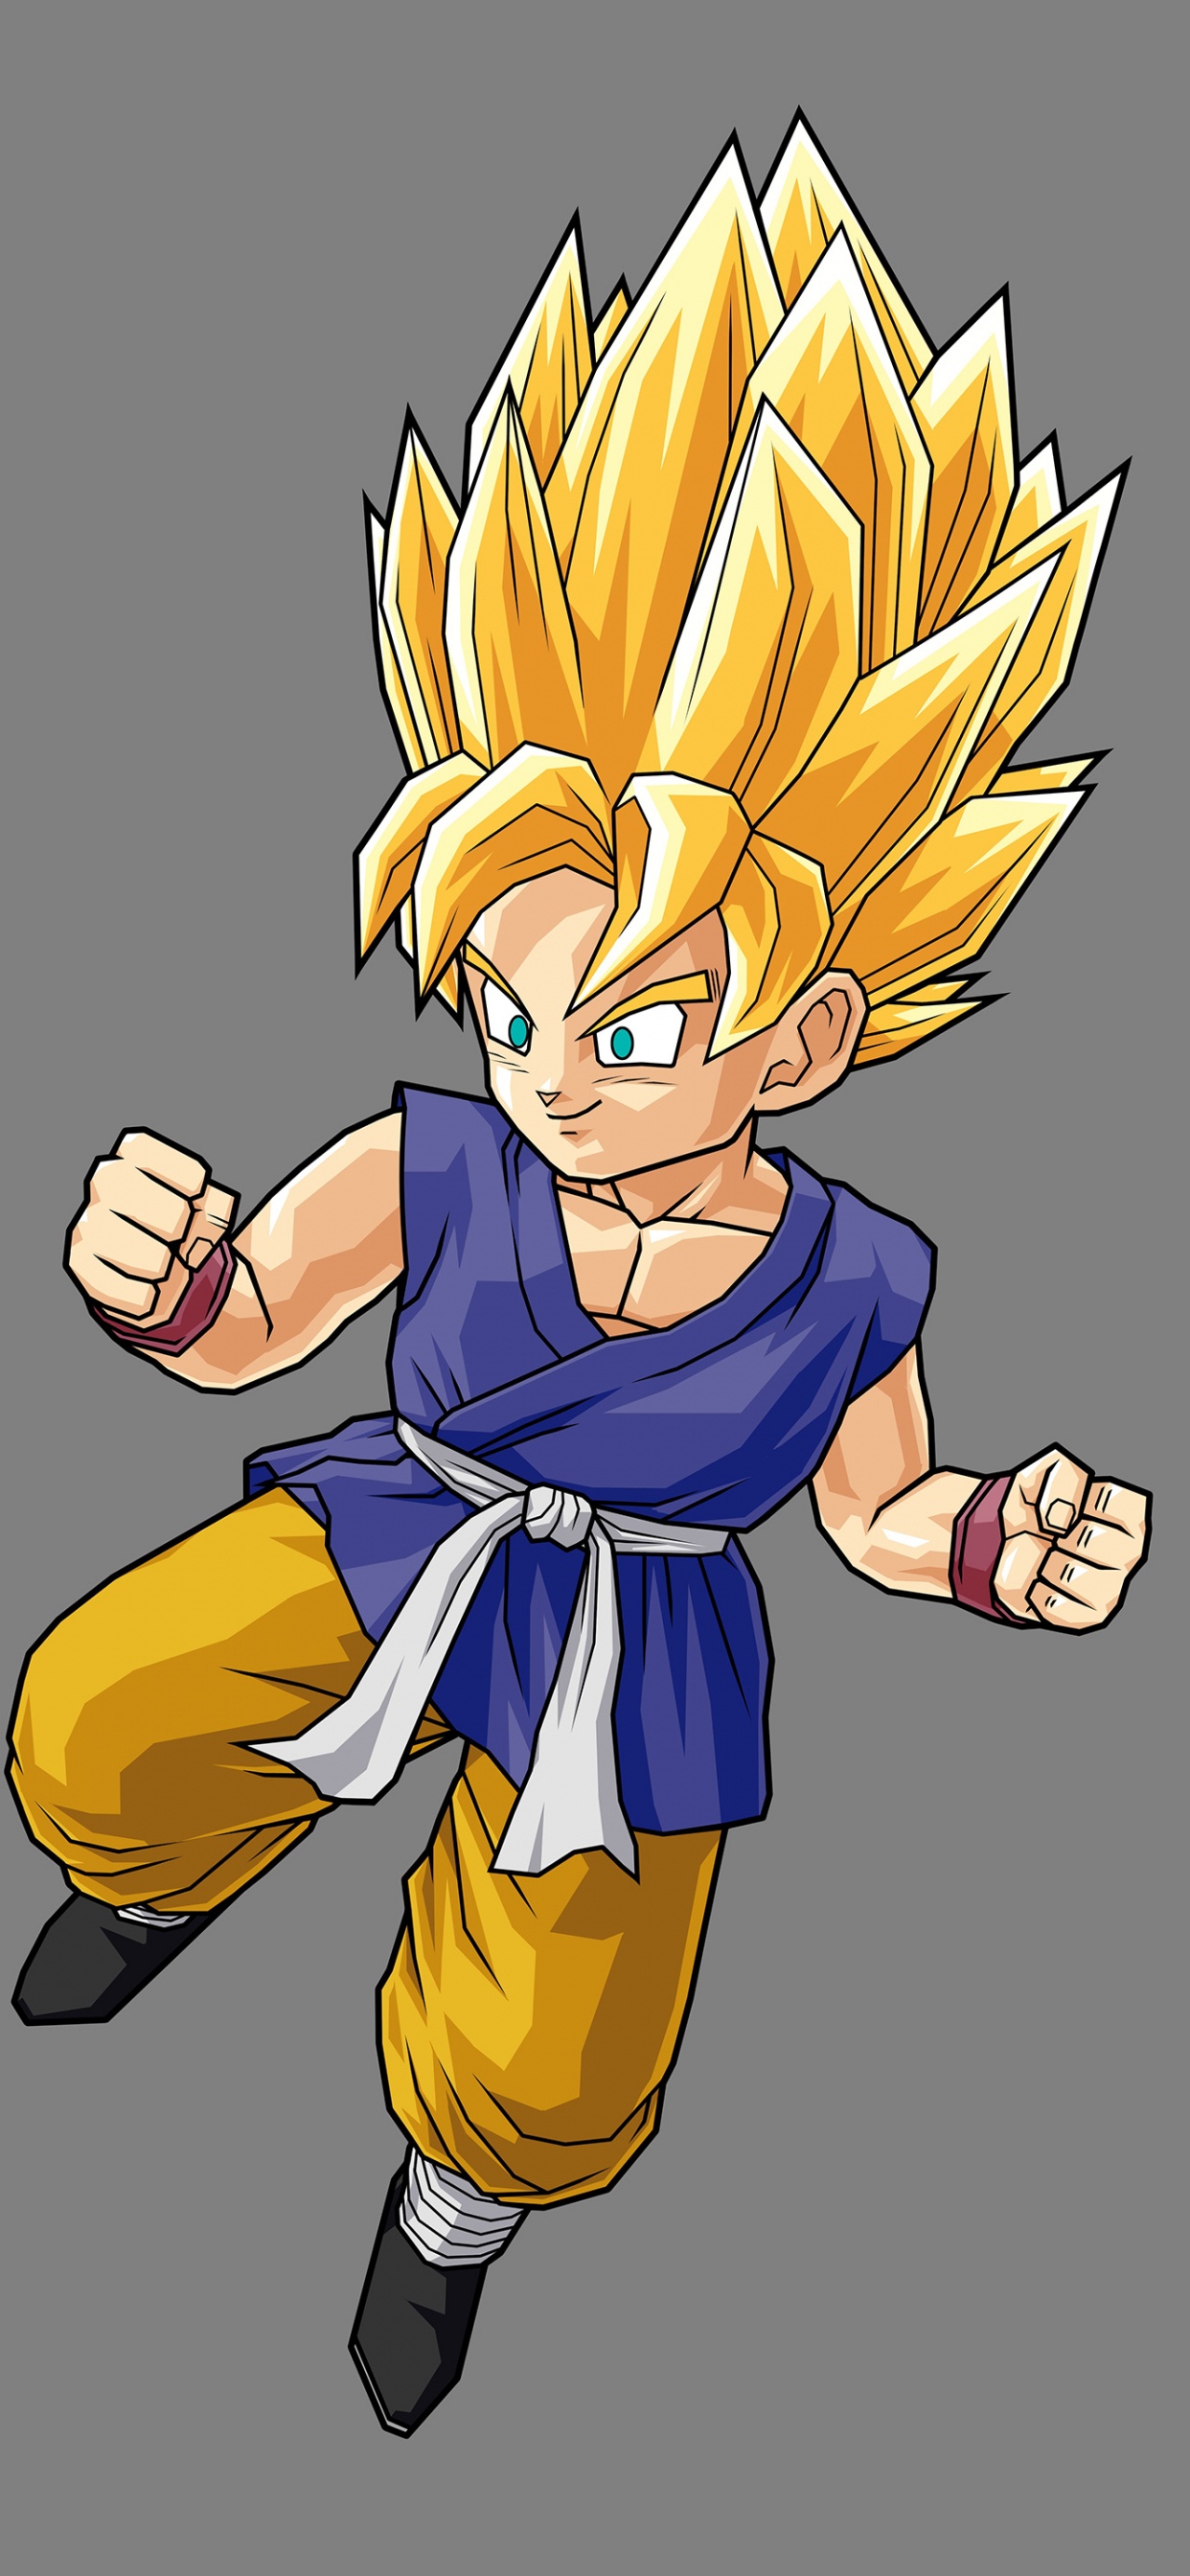 Personnage D'anime Masculin Aux Cheveux Jaunes. Wallpaper in 1242x2688 Resolution